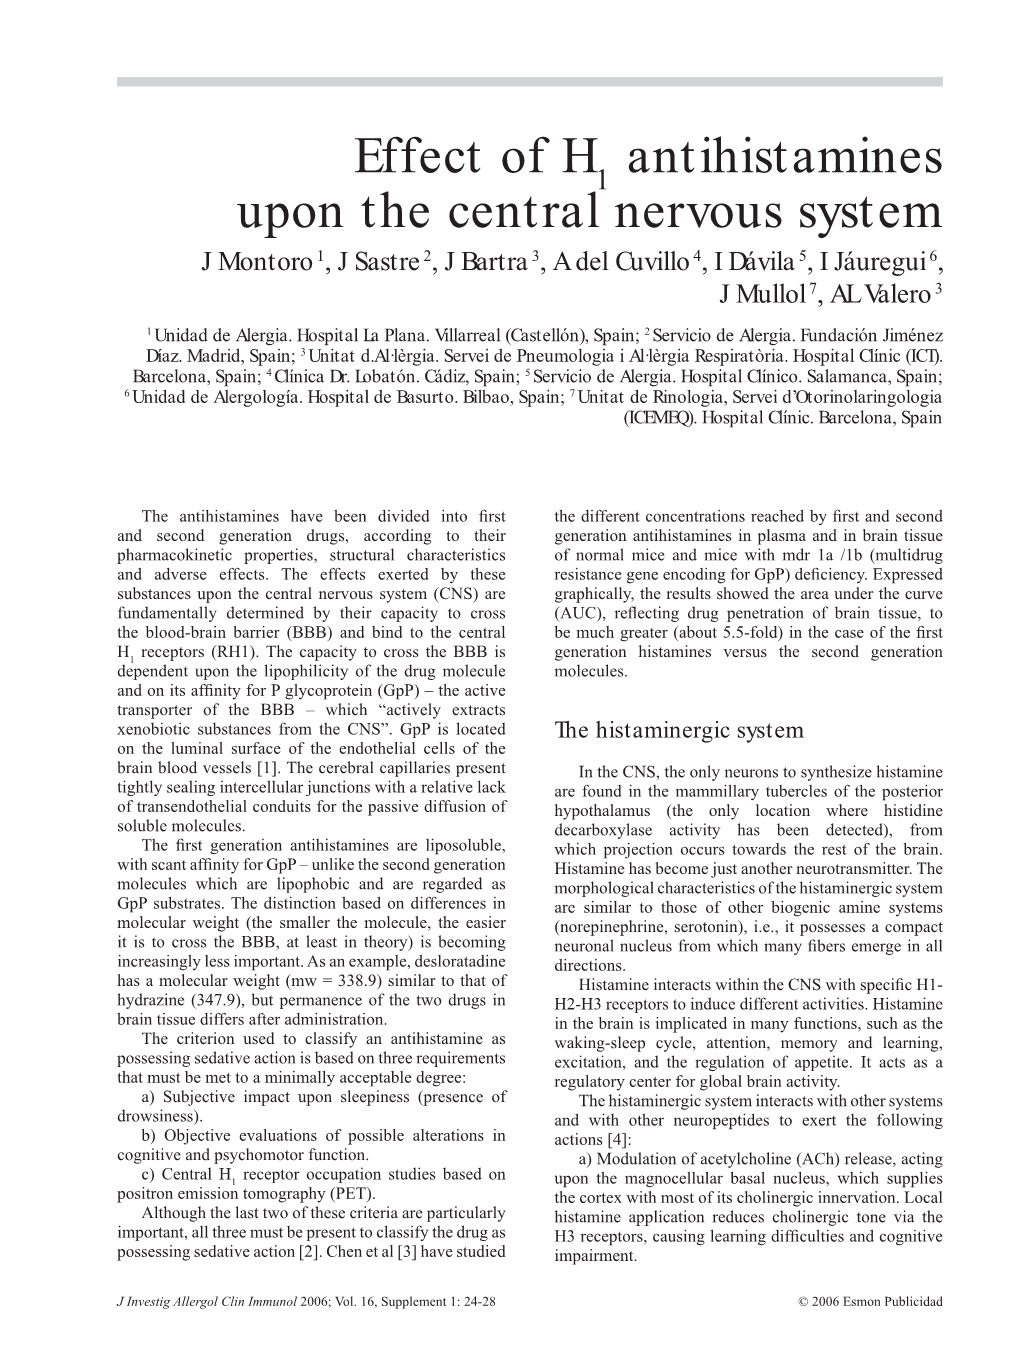 Effect of H Antihistamines Upon the Central Nervous System